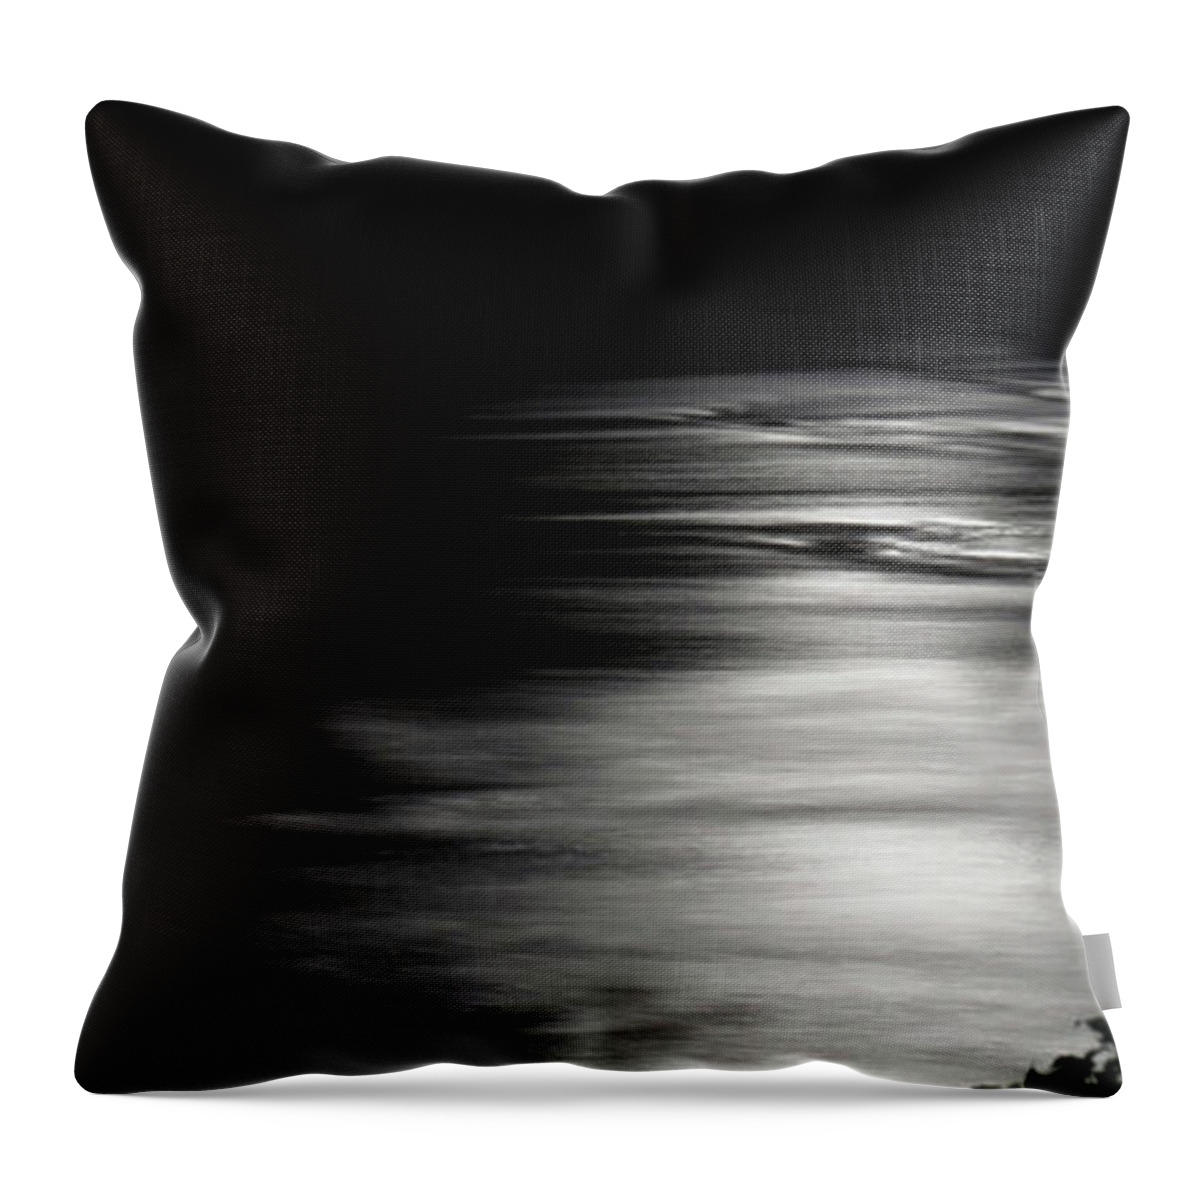 River Throw Pillow featuring the digital art Dark River by Kathleen Illes